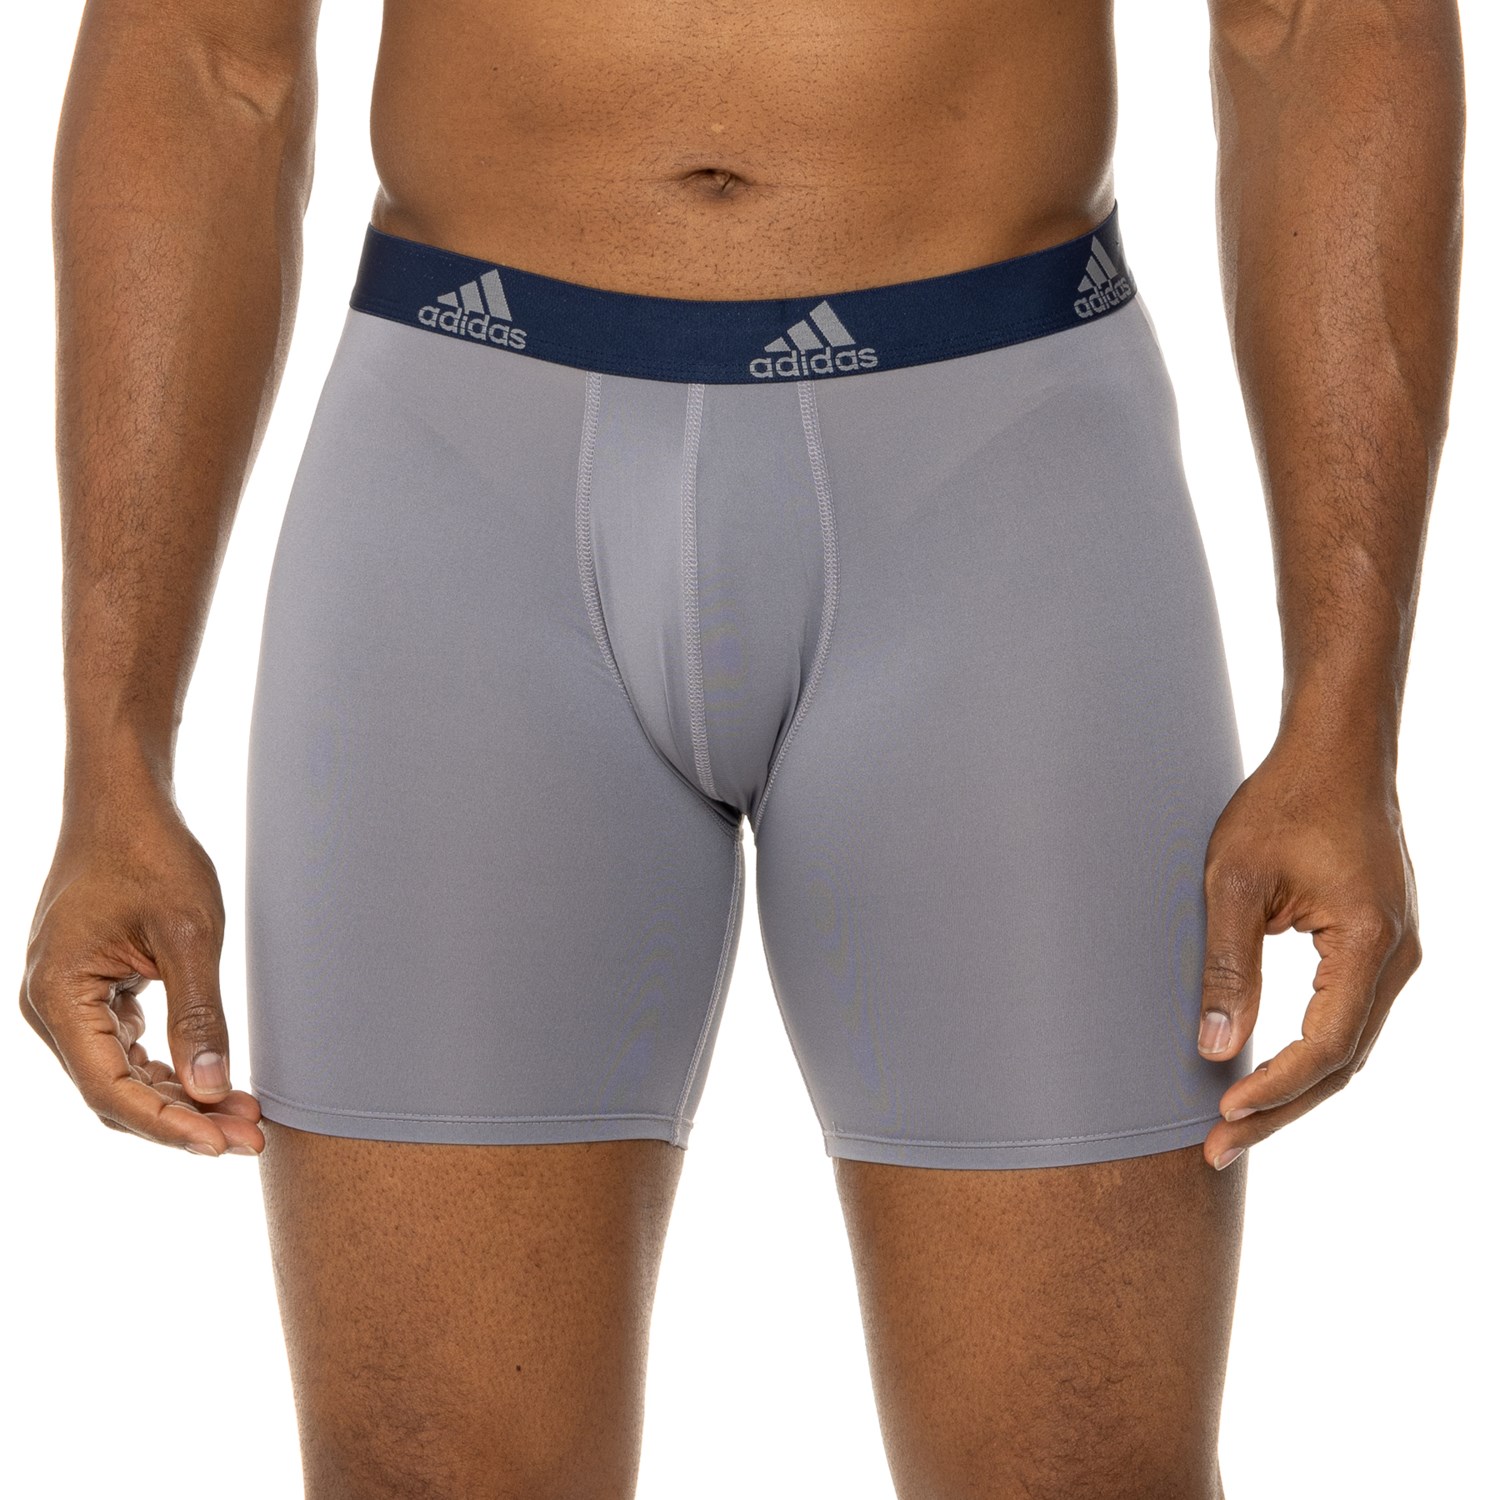 adidas Core Sport-Performance Boxer Briefs - 46% Save 3-Pack 